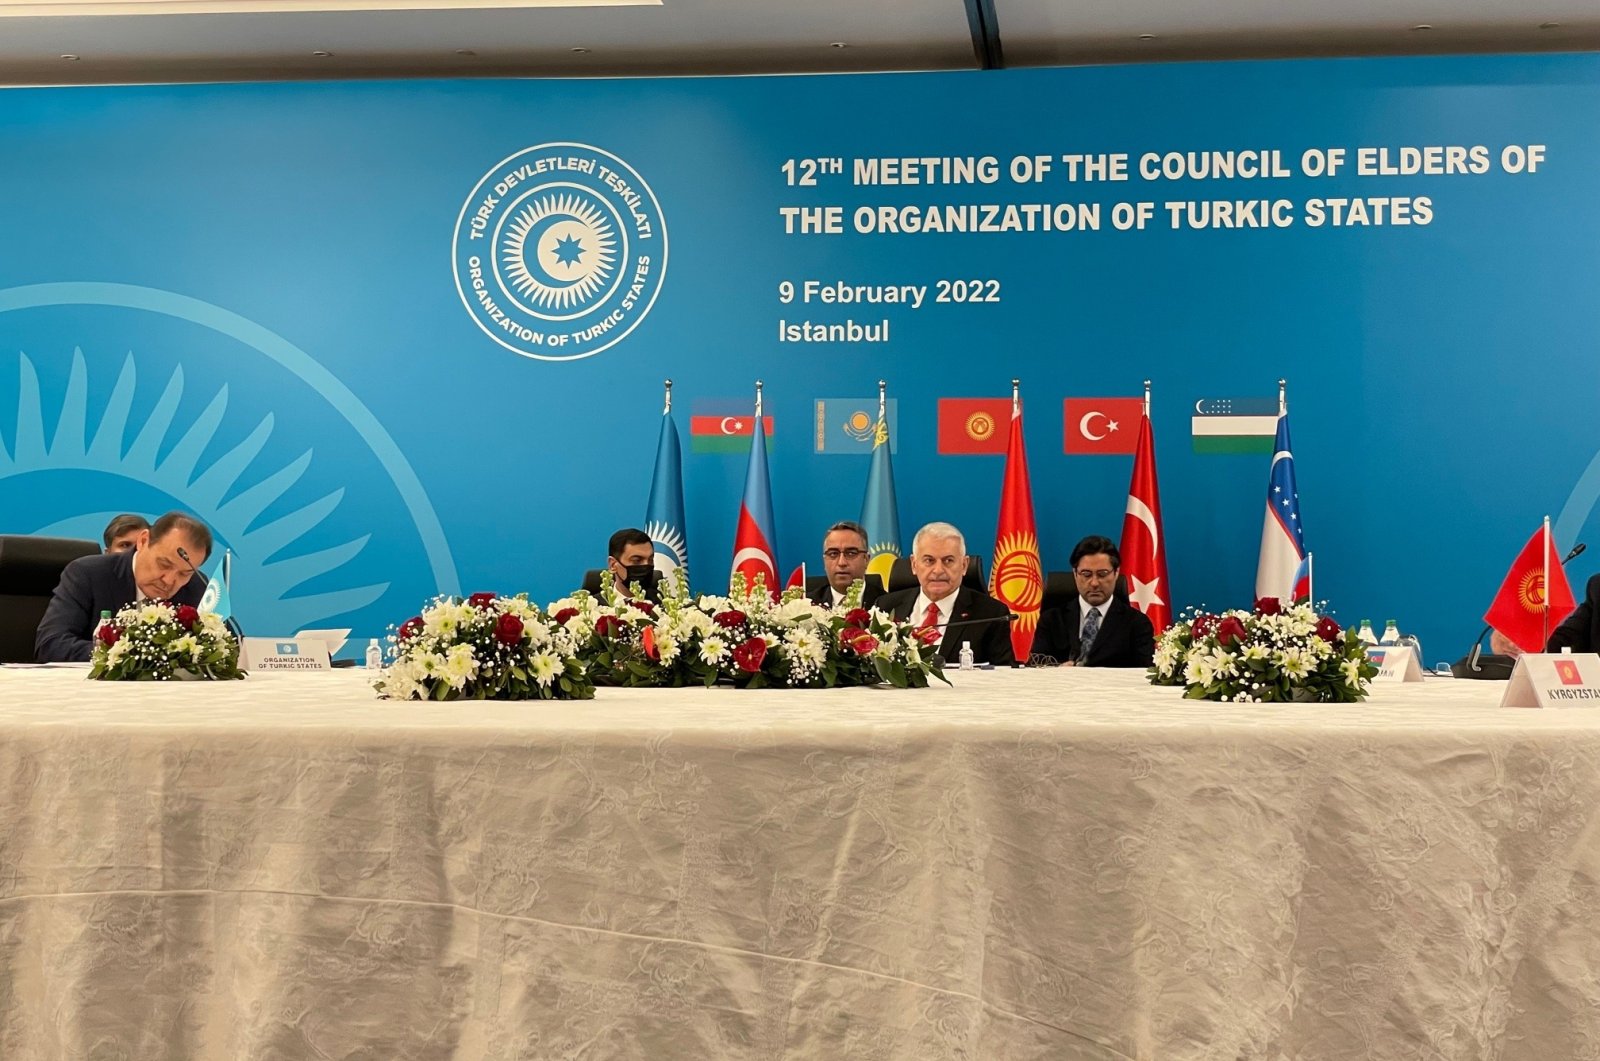 Binali Yıldırım, the chairperson of the Council of Elders of the Organization of Turkic States and the deputy chairperson of Turkey’s ruling Justice and Development Party (AK Party) attends the council&#039;s 12th meeting in Istanbul, Turkey, Feb. 9, 2022. (IHA Photo)